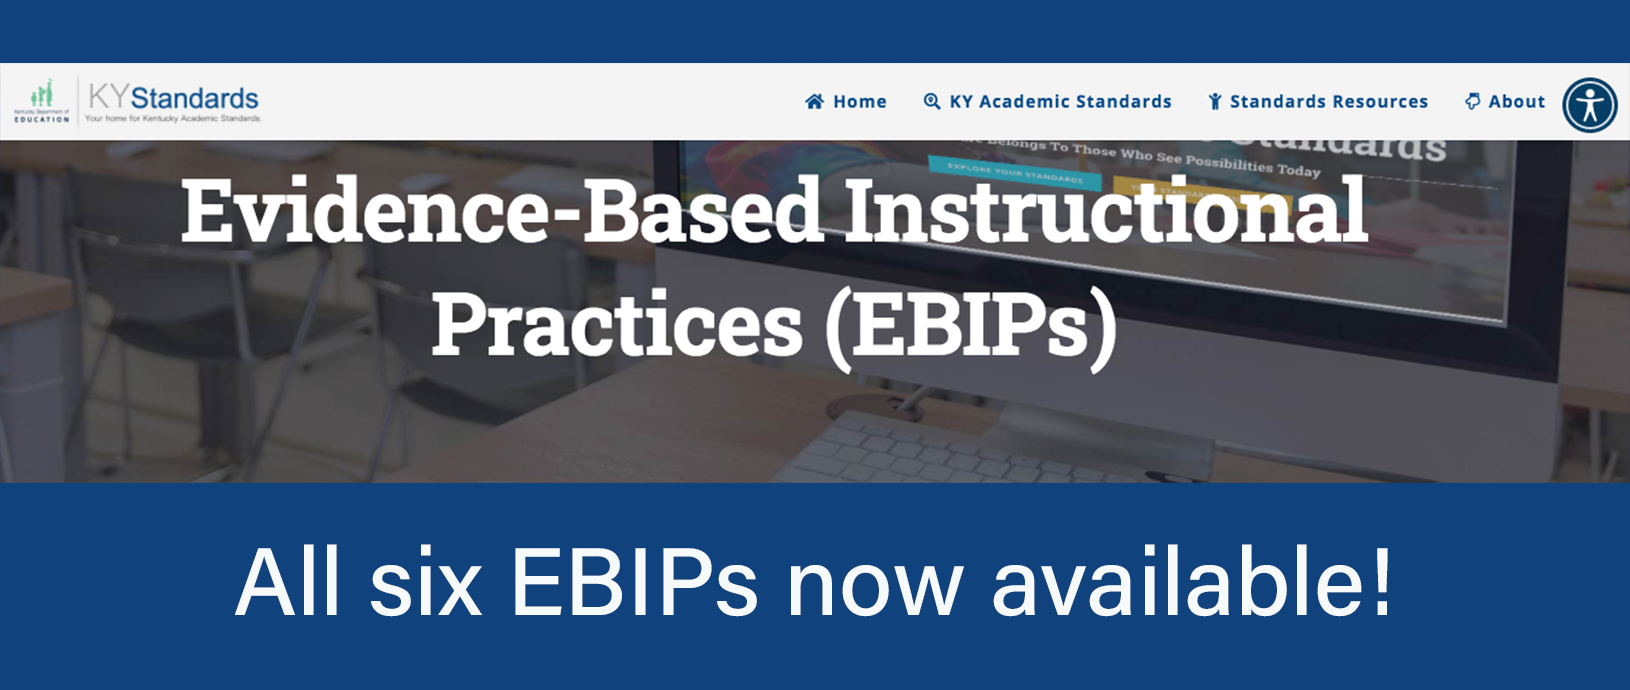 All six evidence-based instructional practices now available!